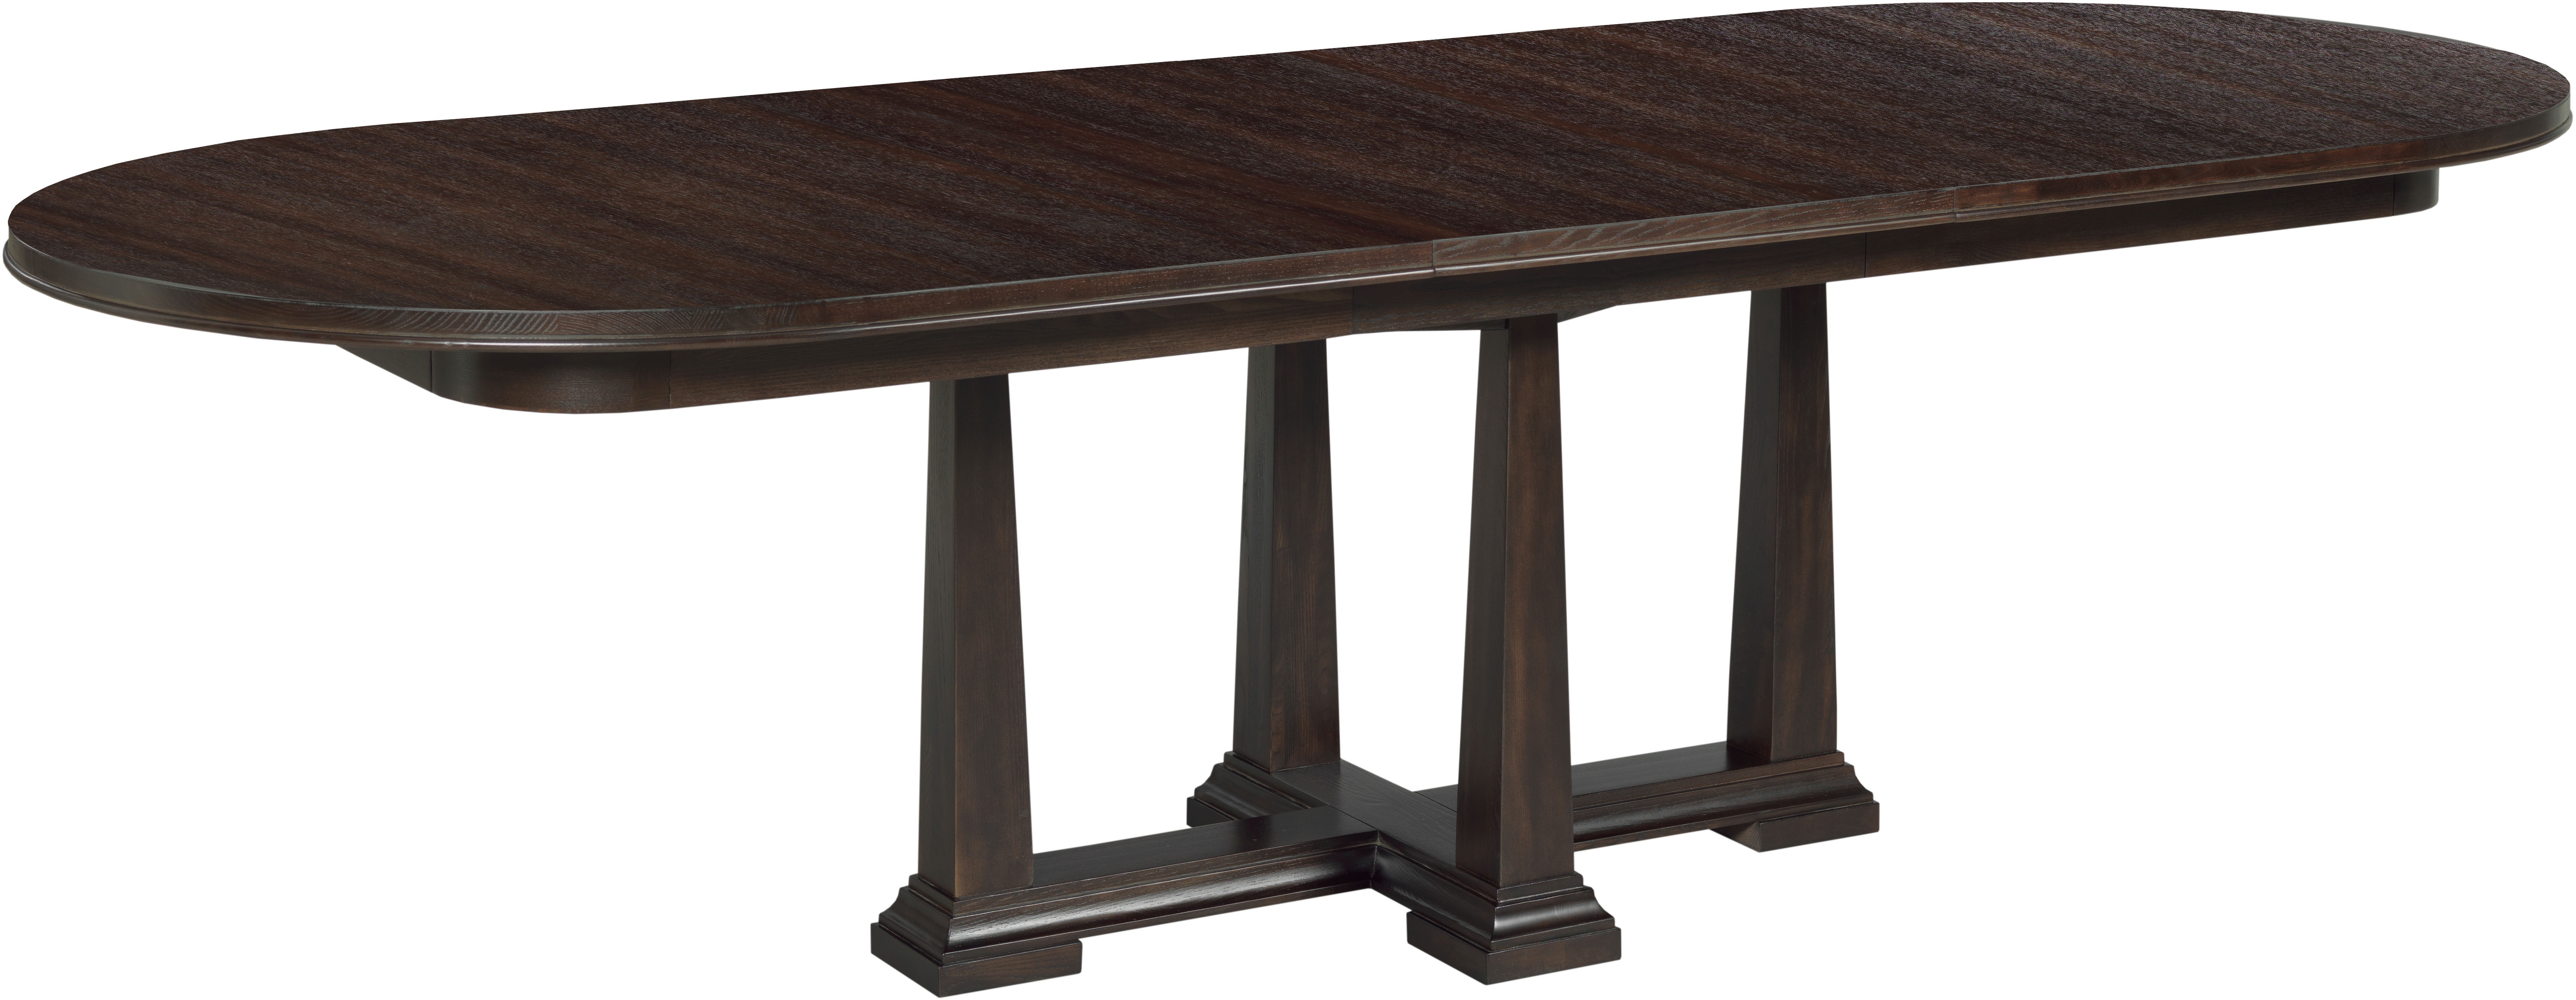 Fairfield Chair Company Lynncliff Dining Table 6800 Dt